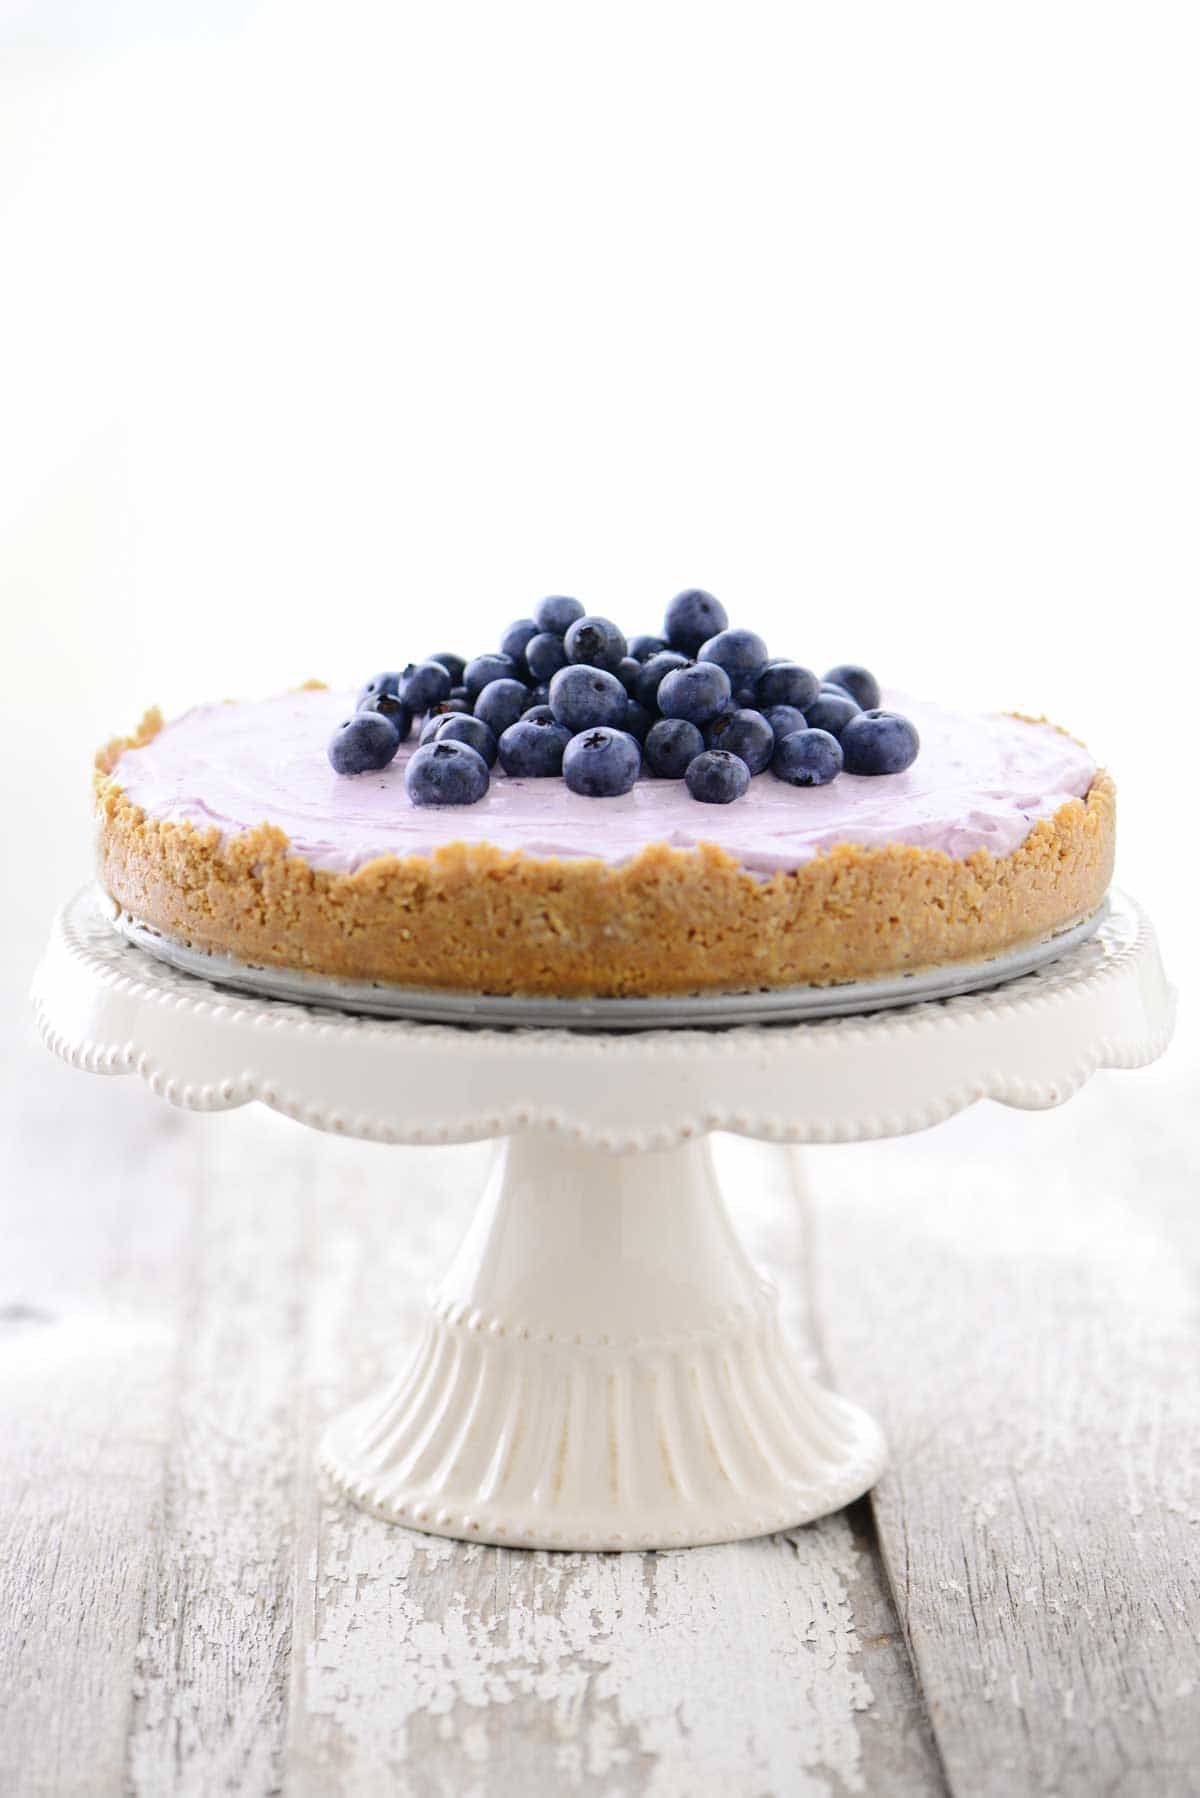 No Bake Blueberry Cheesecake on cake stand